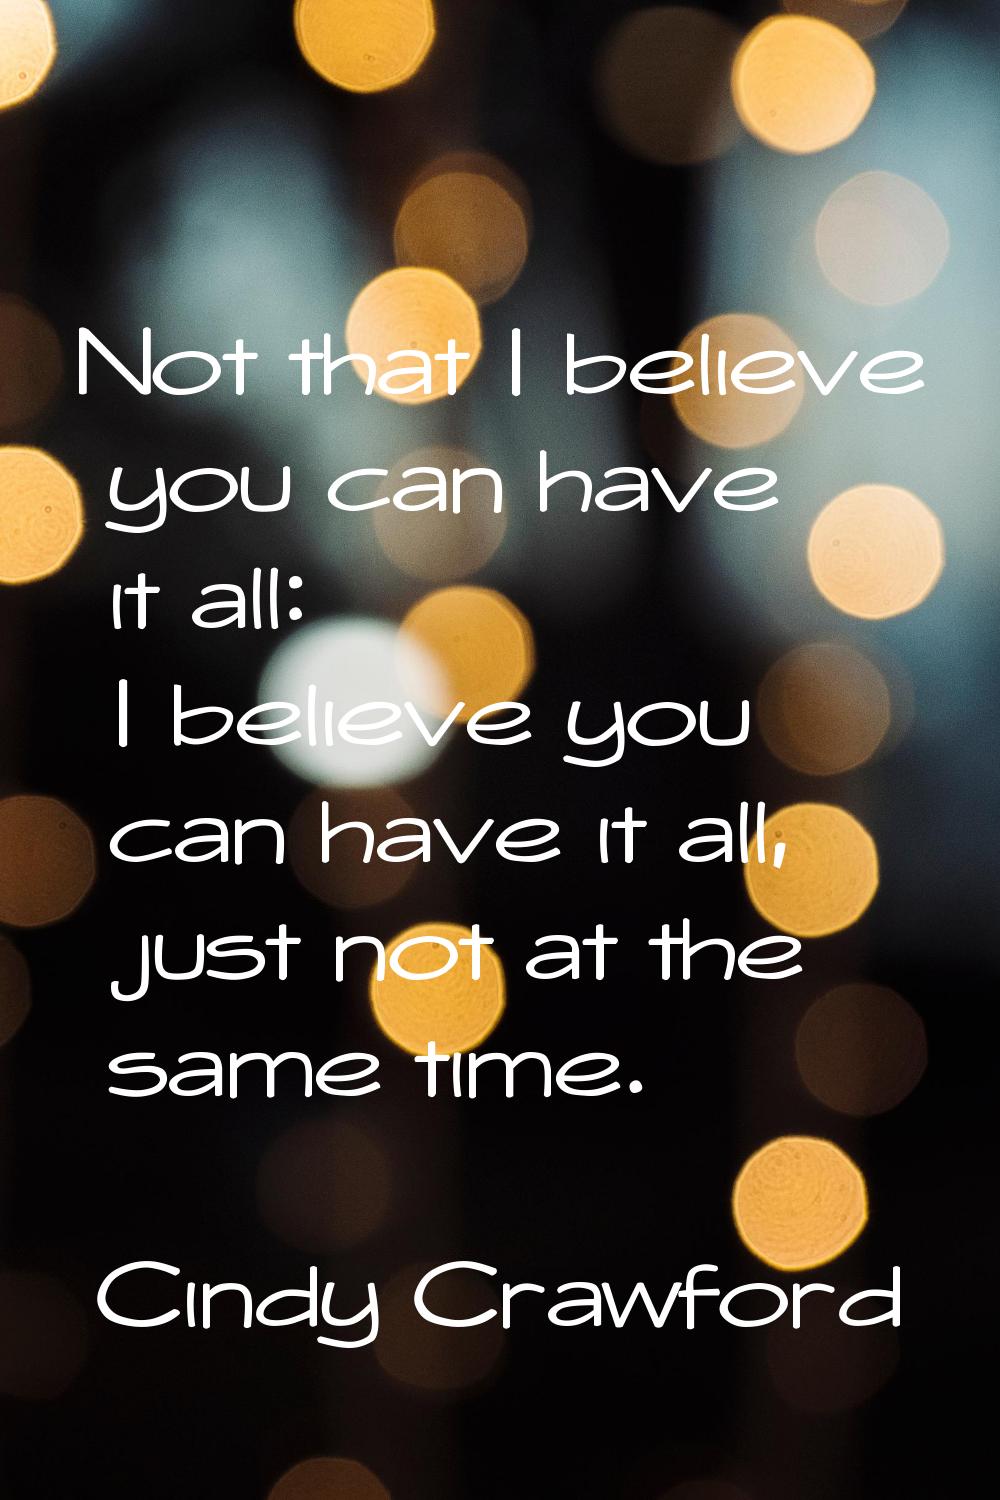 Not that I believe you can have it all: I believe you can have it all, just not at the same time.